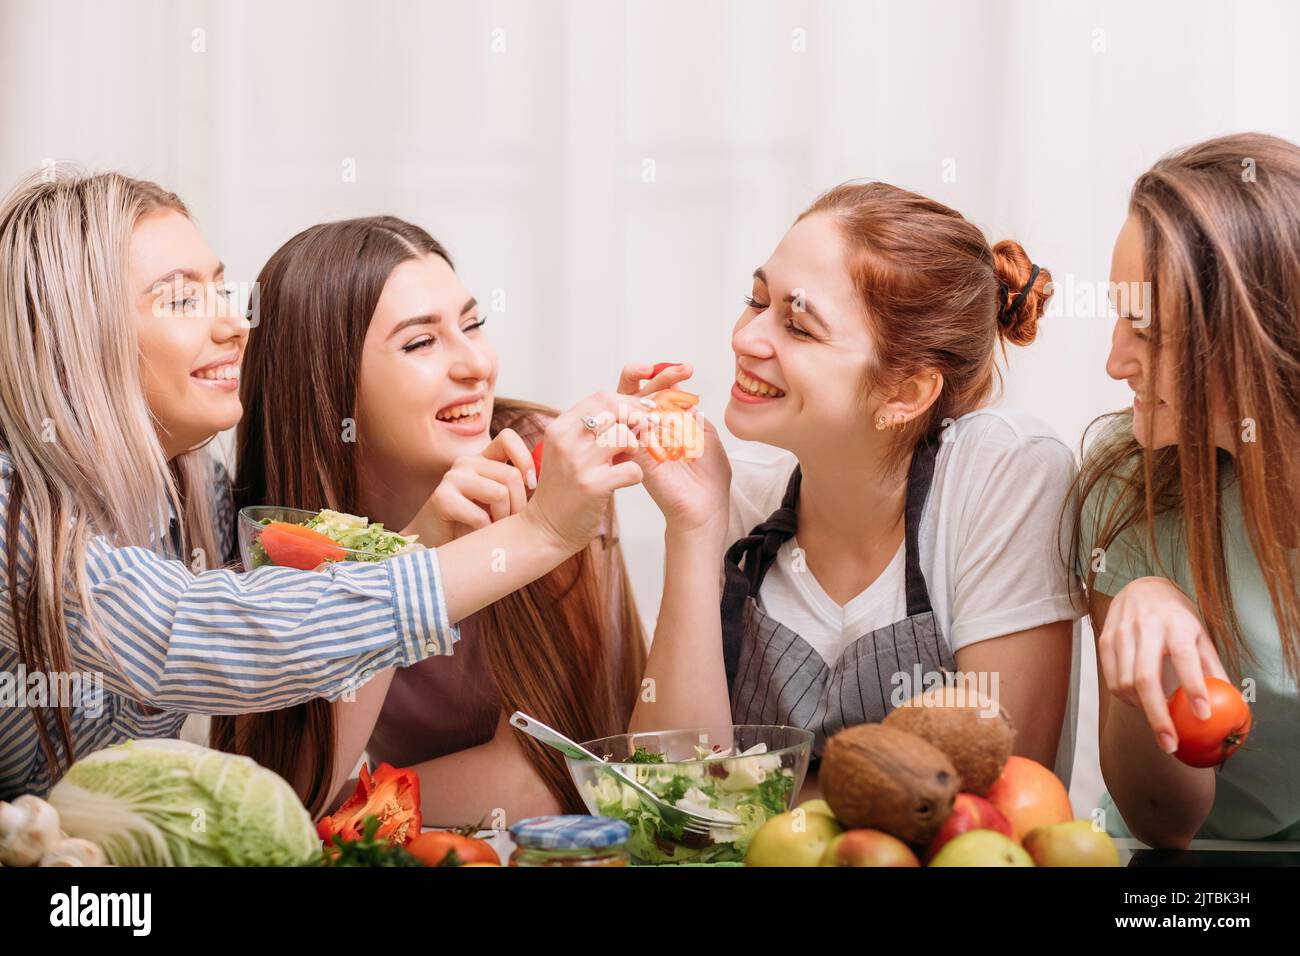 female cooking healthy eating dieting nutrition Stock Photo